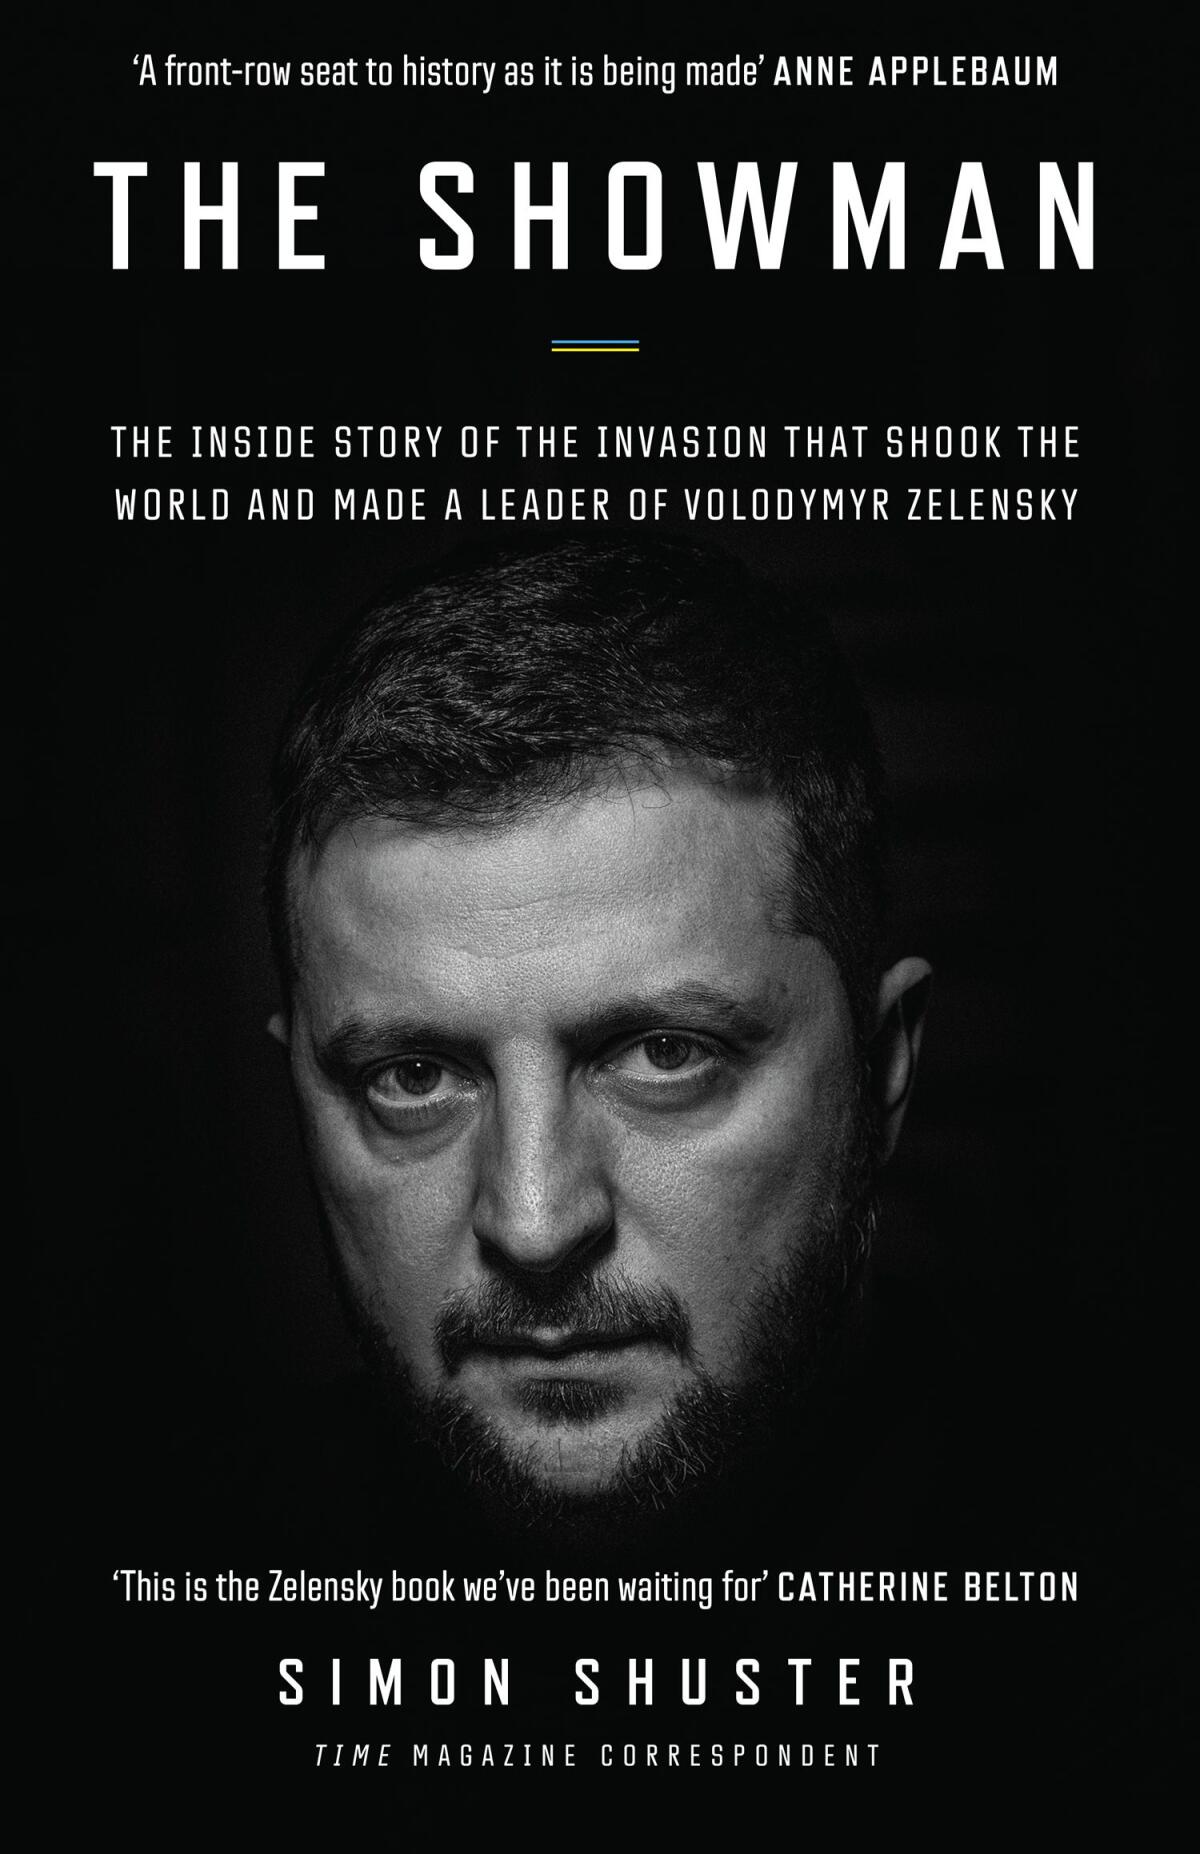 "The Showman: Inside the Invasion That Shook the World and Made a Leader of Volodymyr Zelensky" by Simon Shuster